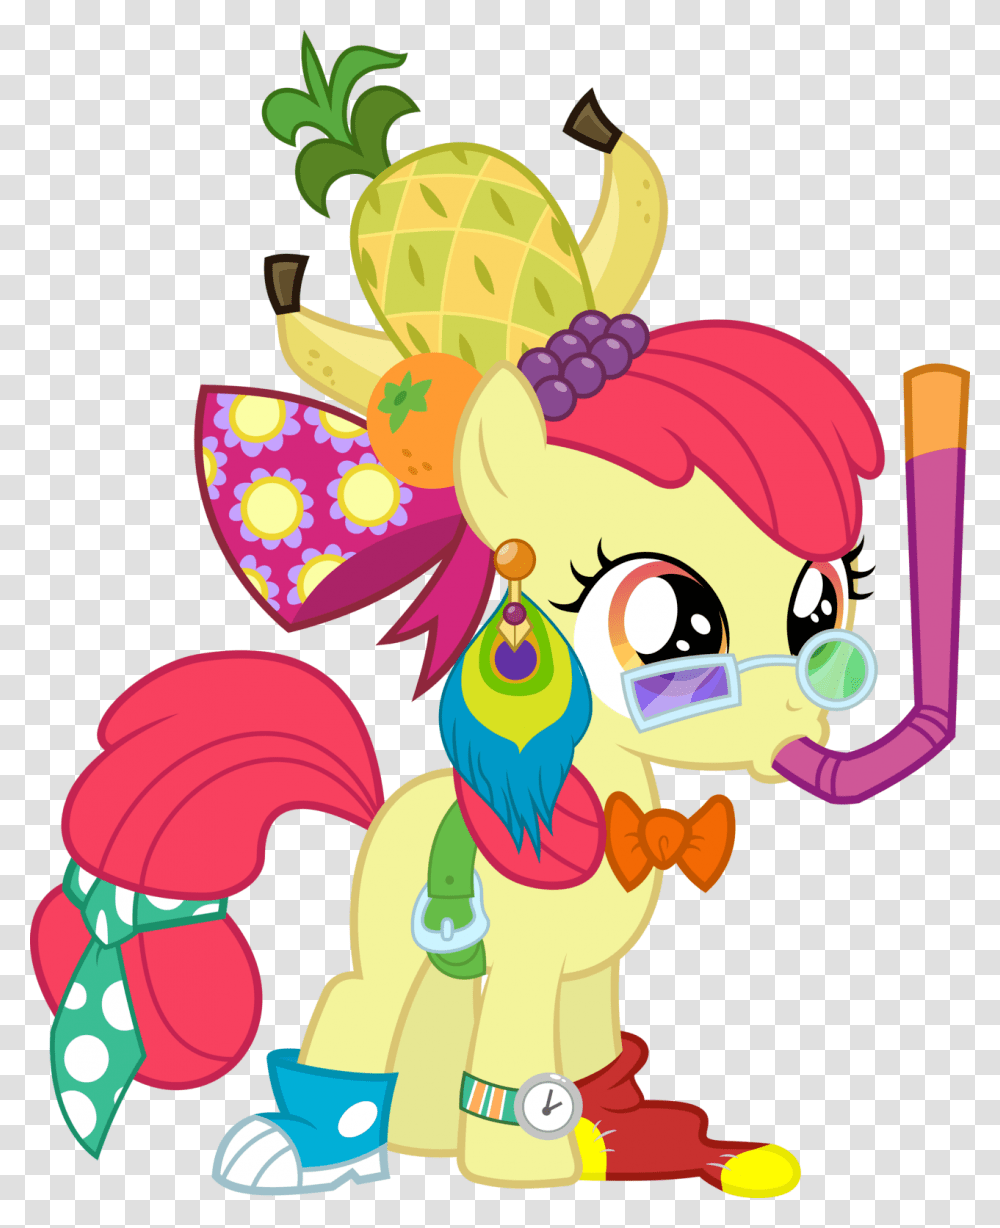 Dat Fashion My Little Pony Friendship Is Magic Know Your Meme, Performer, Floral Design Transparent Png